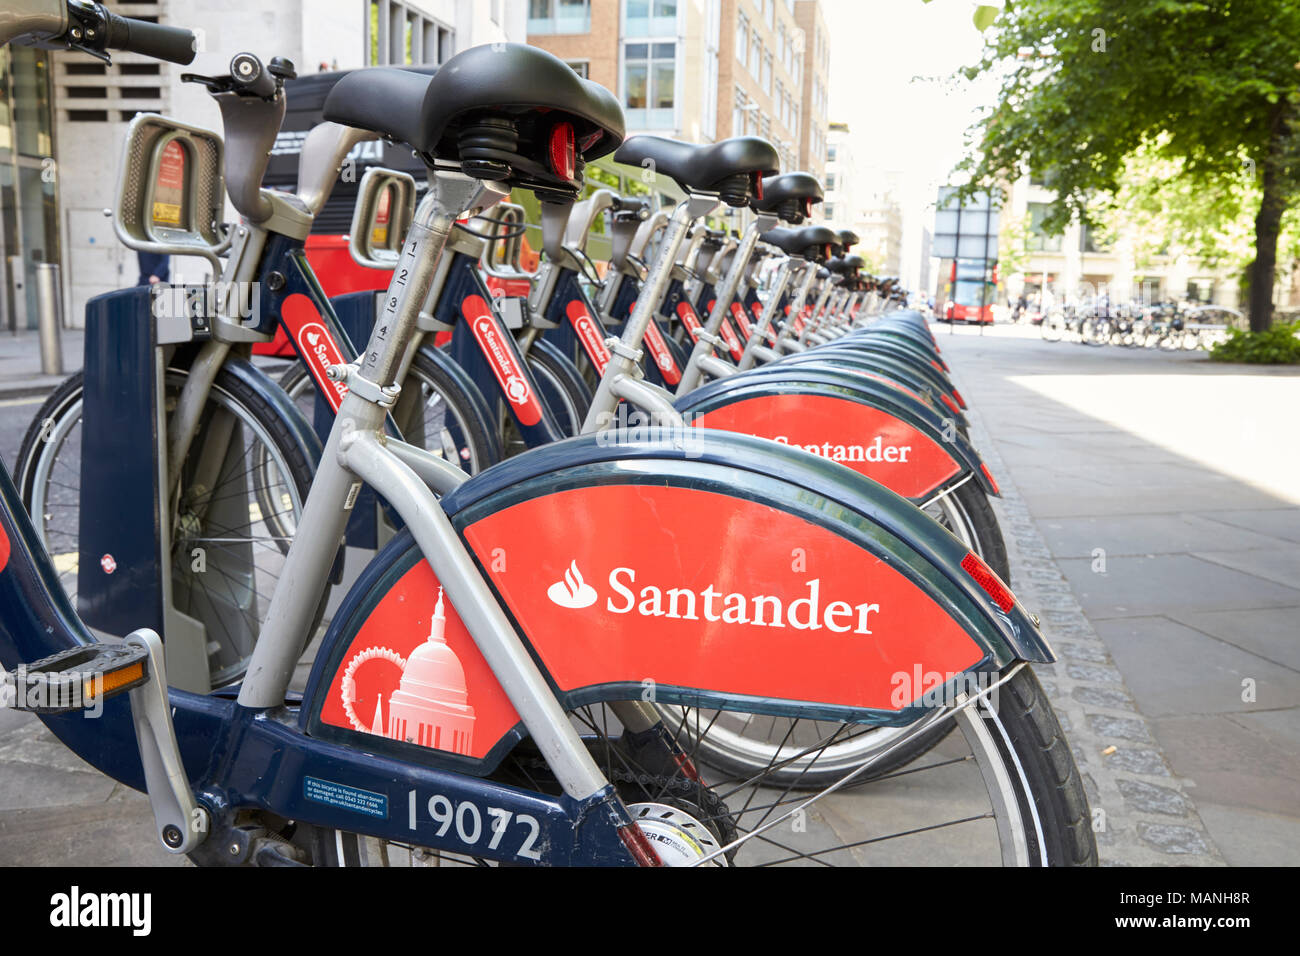 LONDON - MAY, 2017: A row of city bikes, available for hire in the City of London, detail Stock Photo